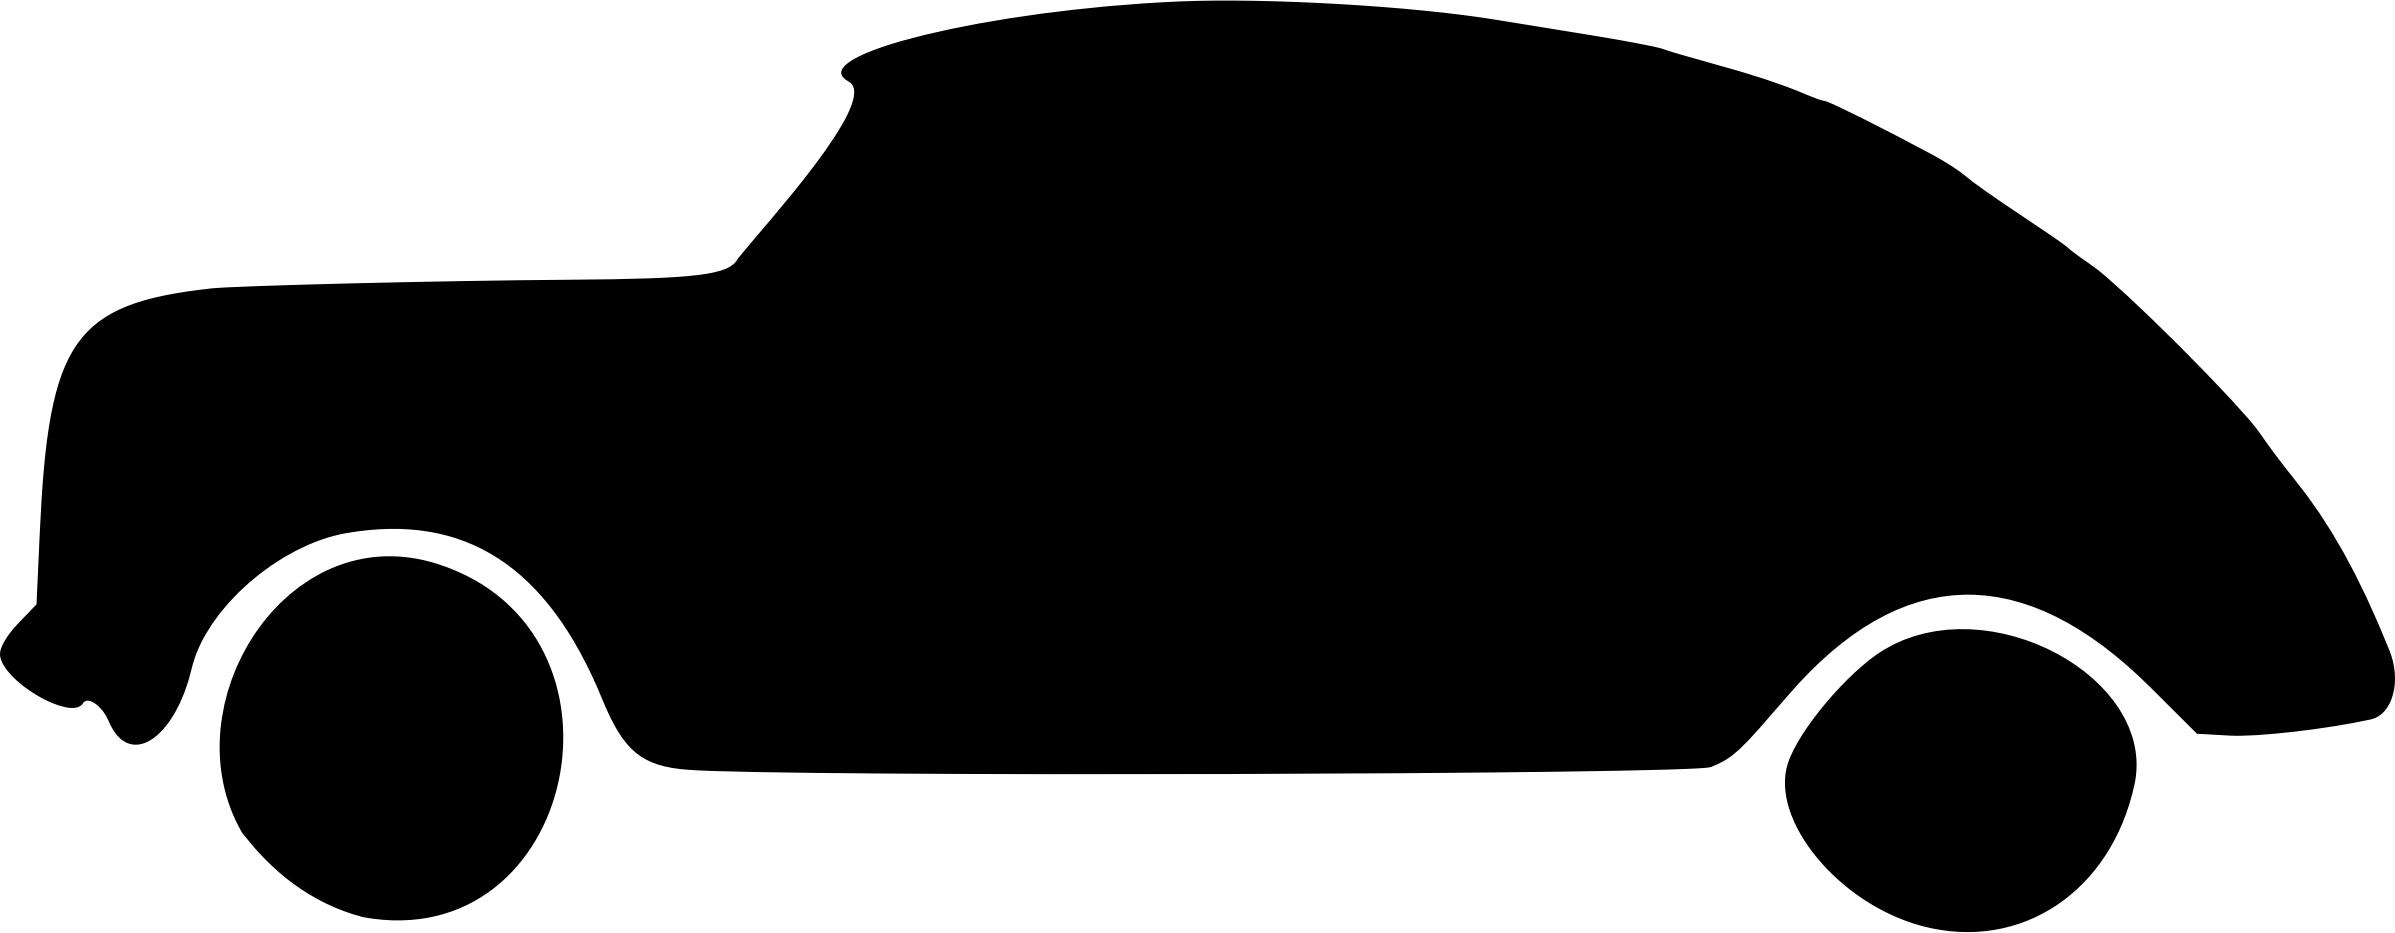 Car silhouette 2 png